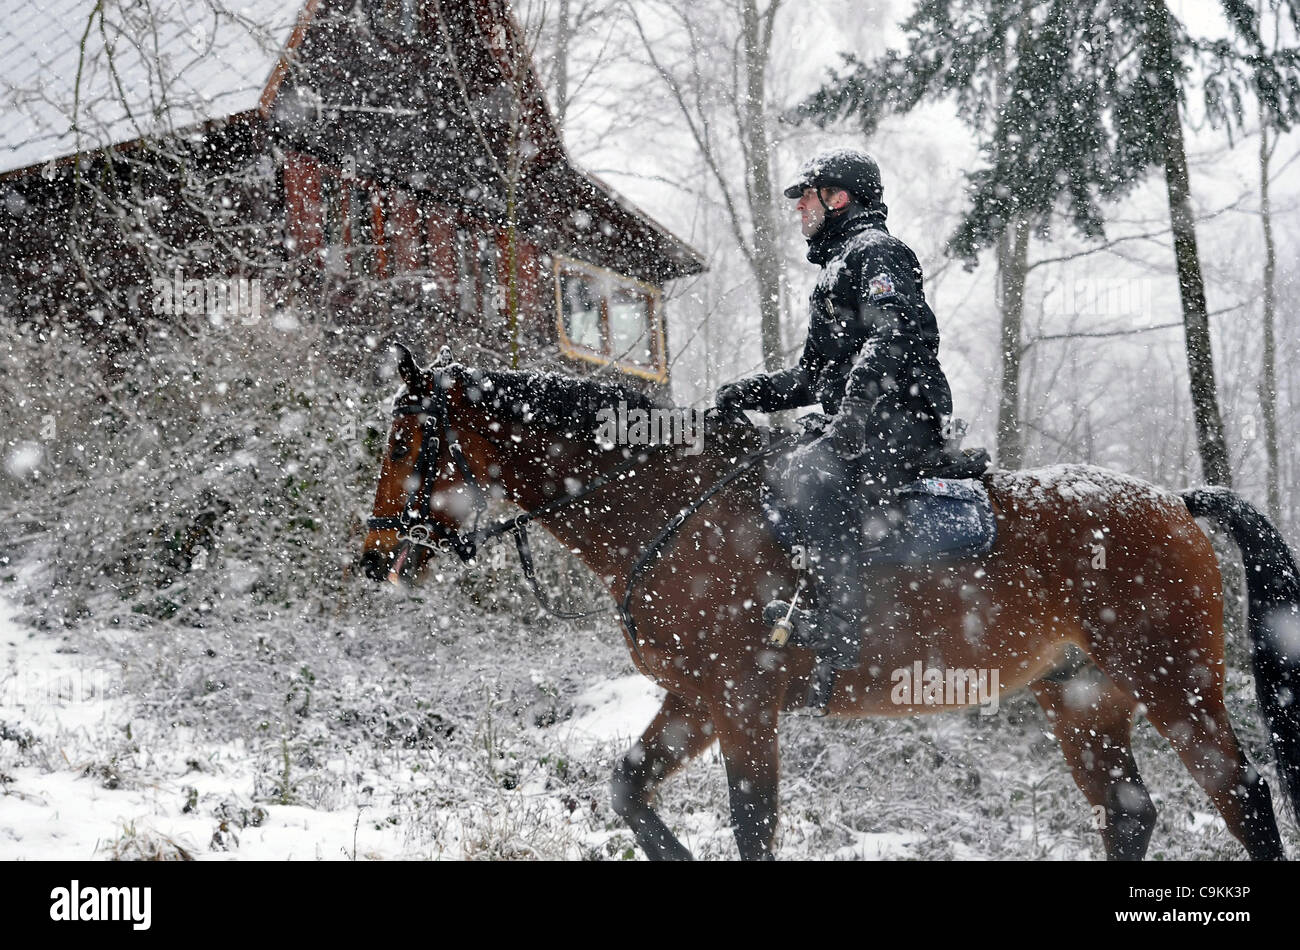 Brno Mounted Police Unit checks recreational chalets around Jedovice cottage, January 20, 2012. Last year police at Blansko recorded 40 burglaries, most thieves are stealing just in the winter months when recreational facilities are abandoned. (CTK Photo/Igor Sefr) Stock Photo